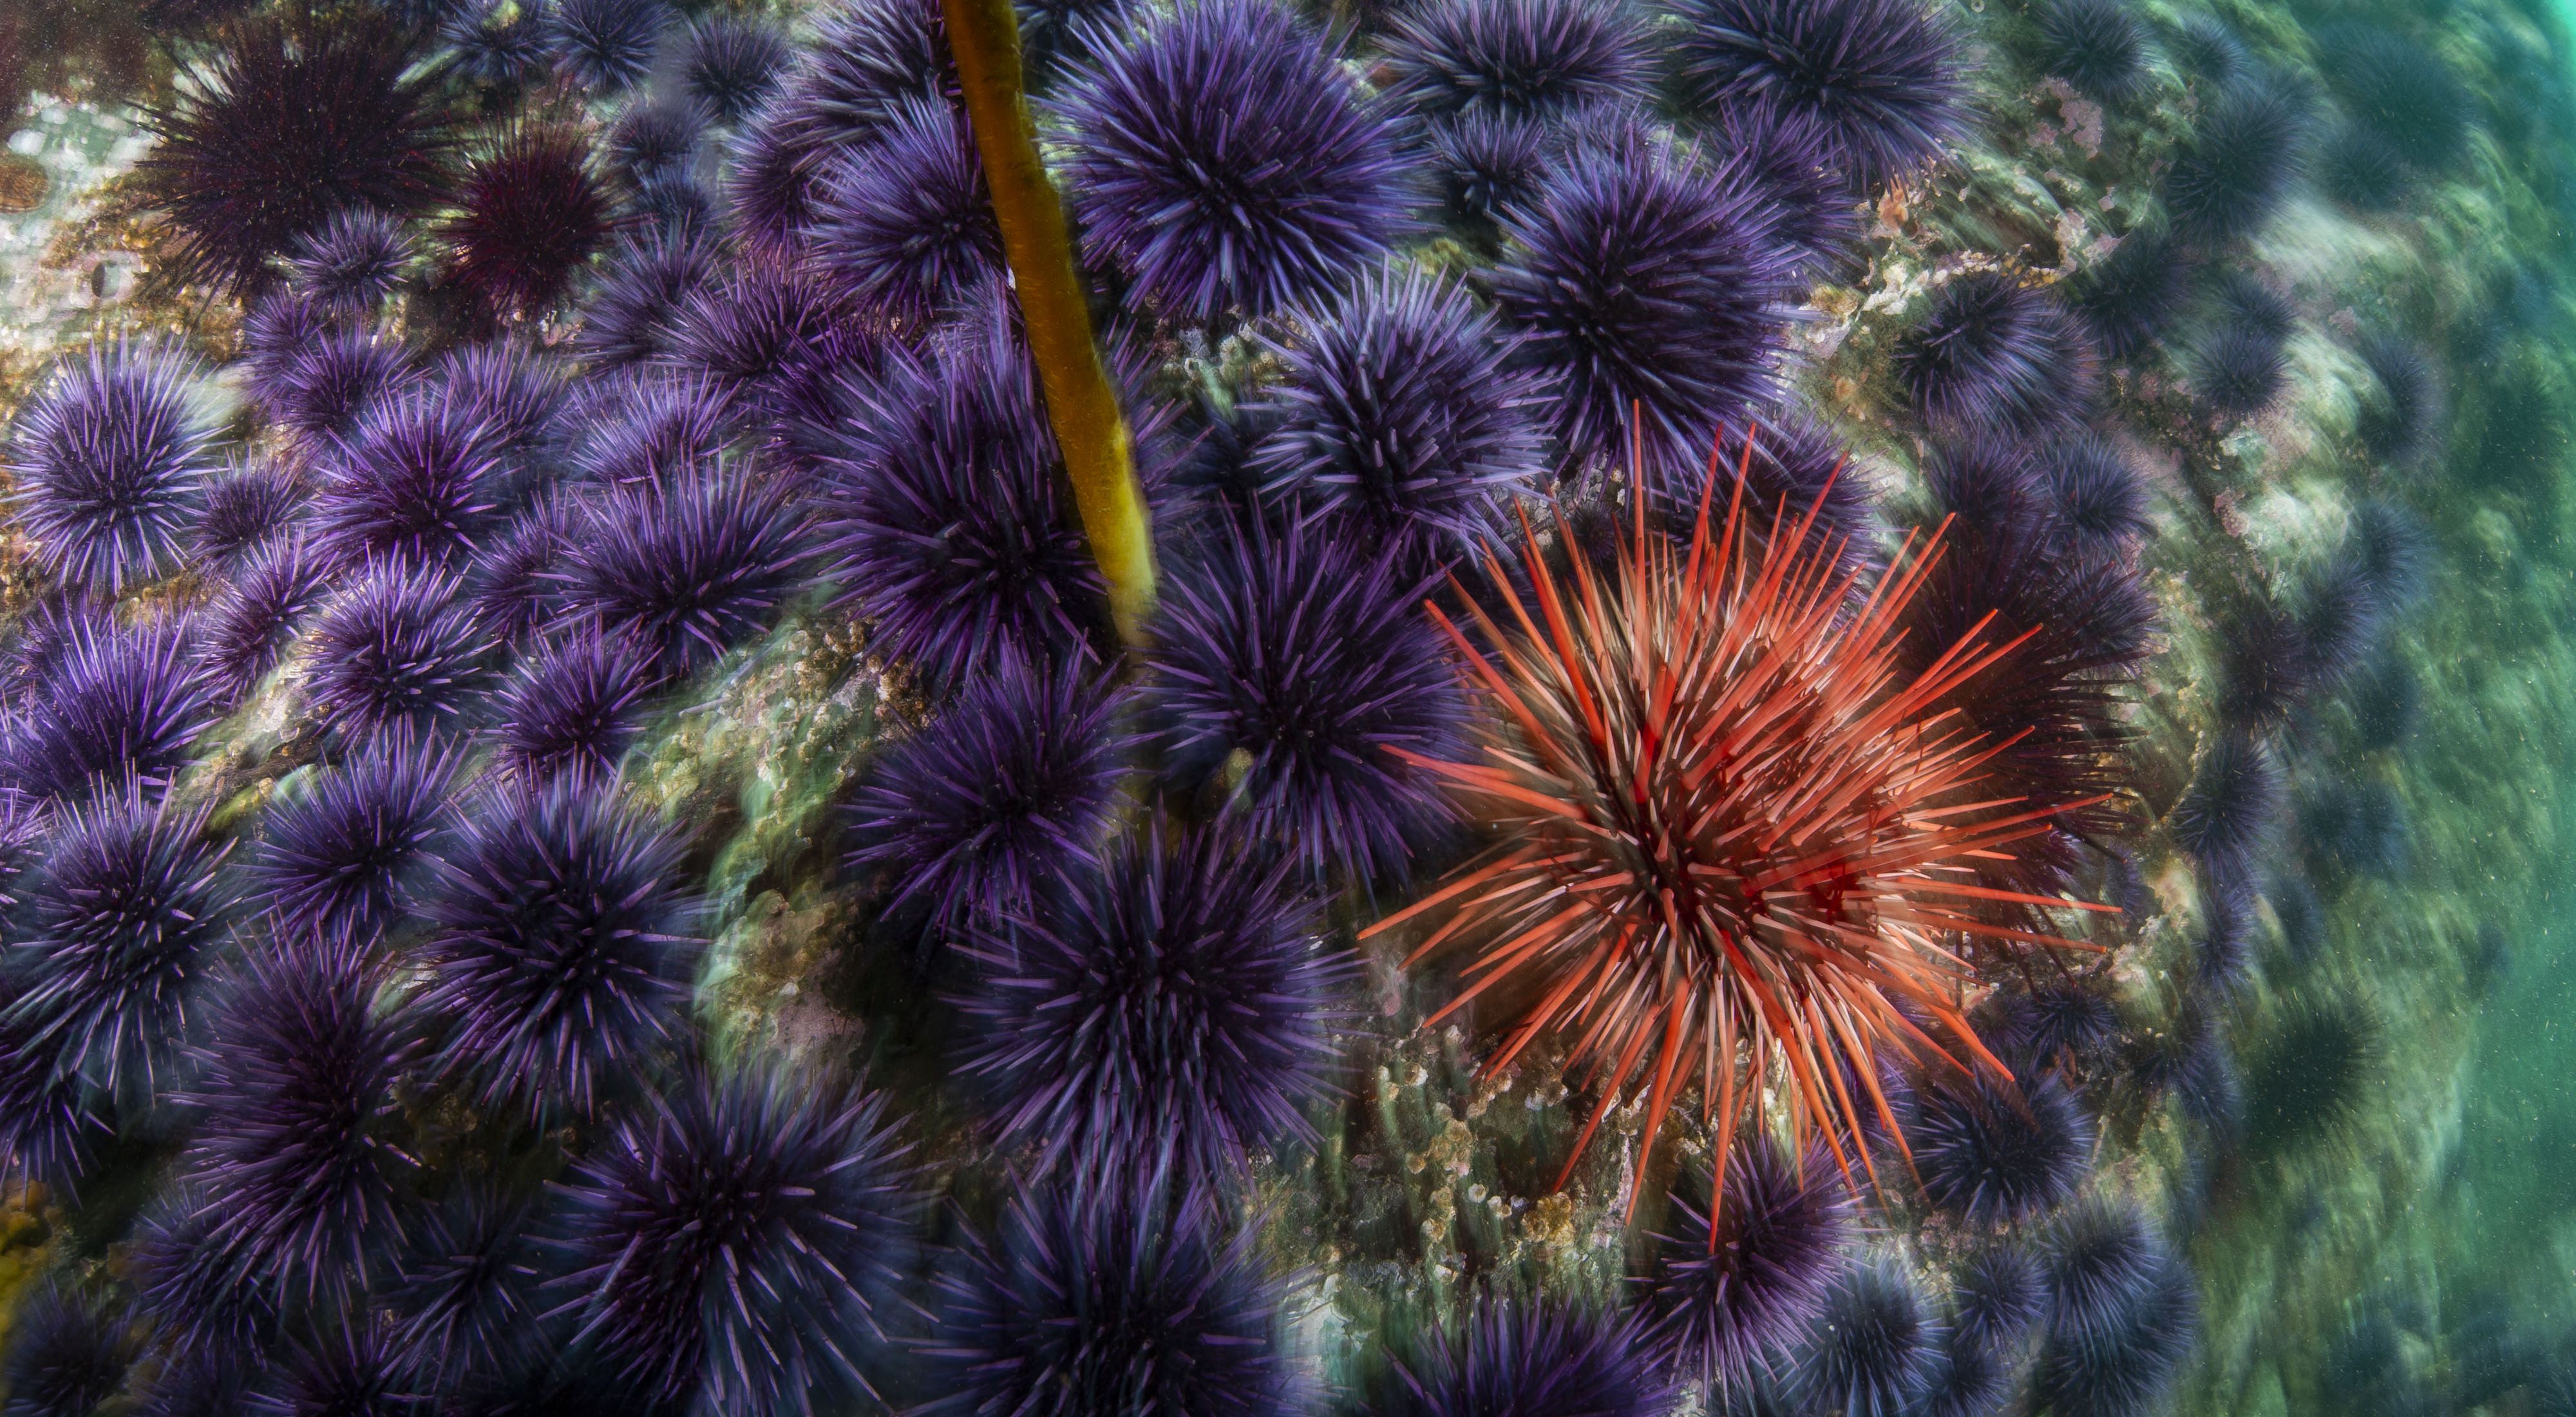 A red sea urchin is surrounded by purple urchins.